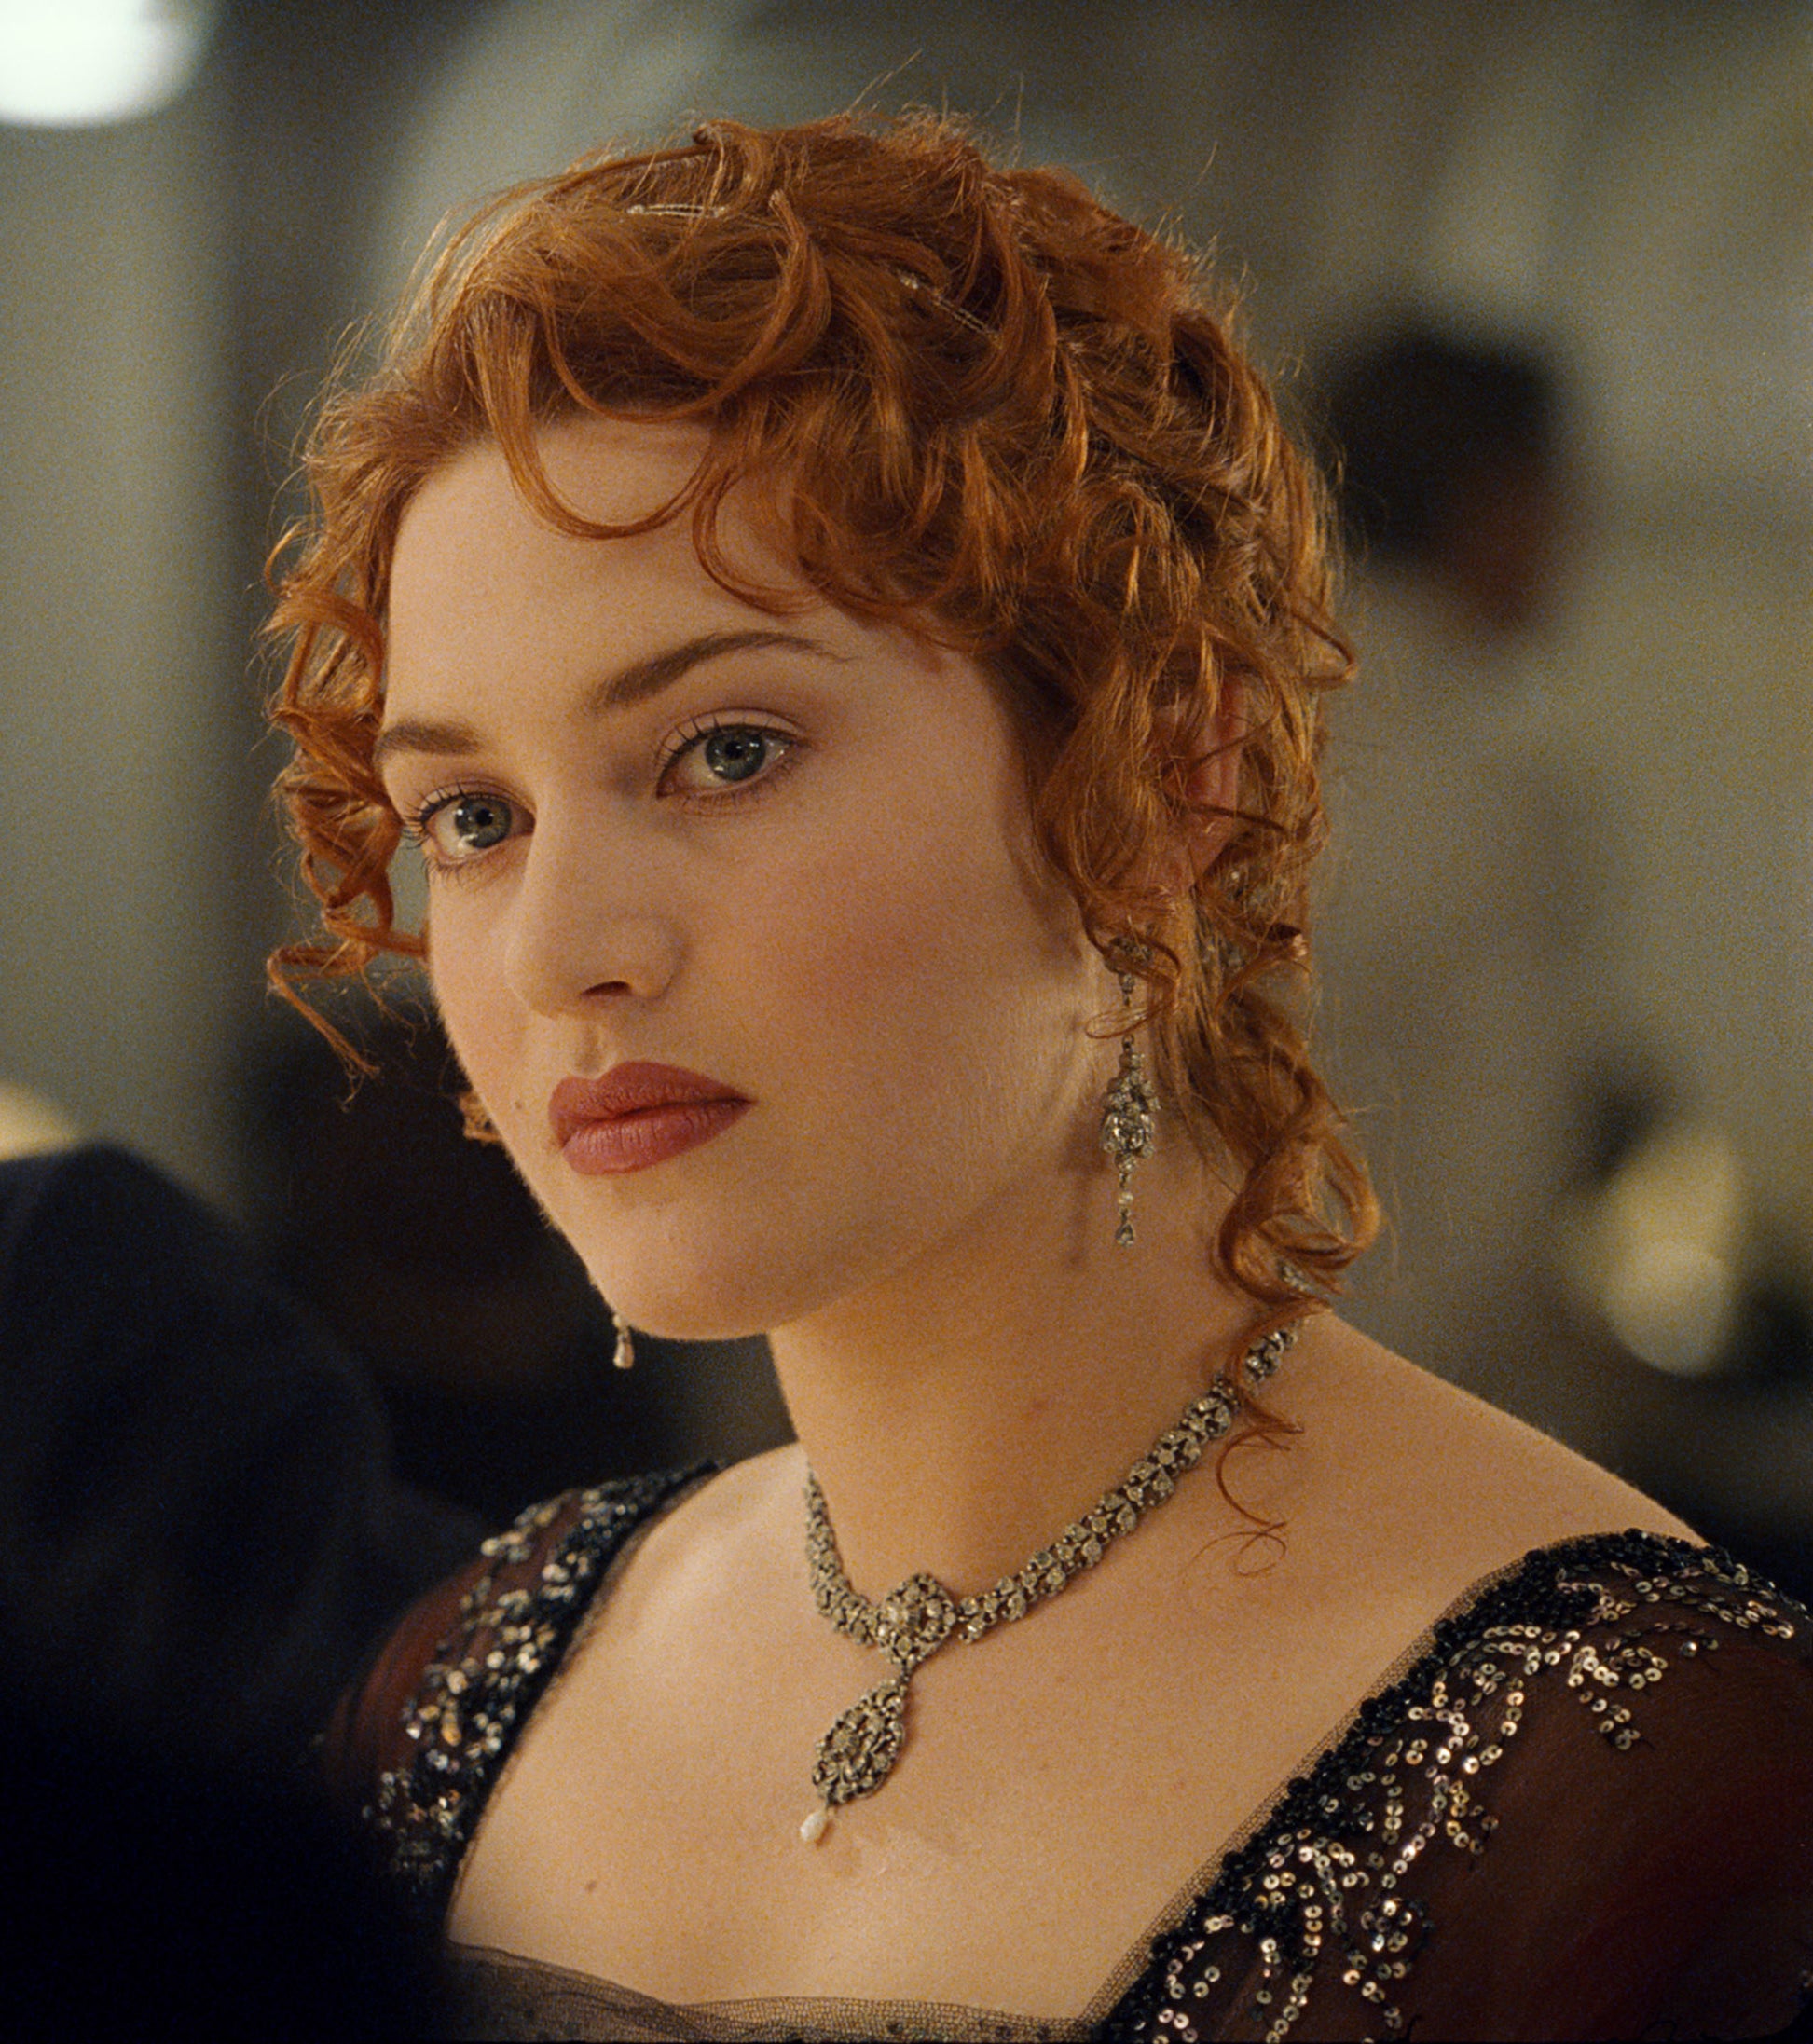 Kate Winslet as Rose in &quot;Titanic&quot;